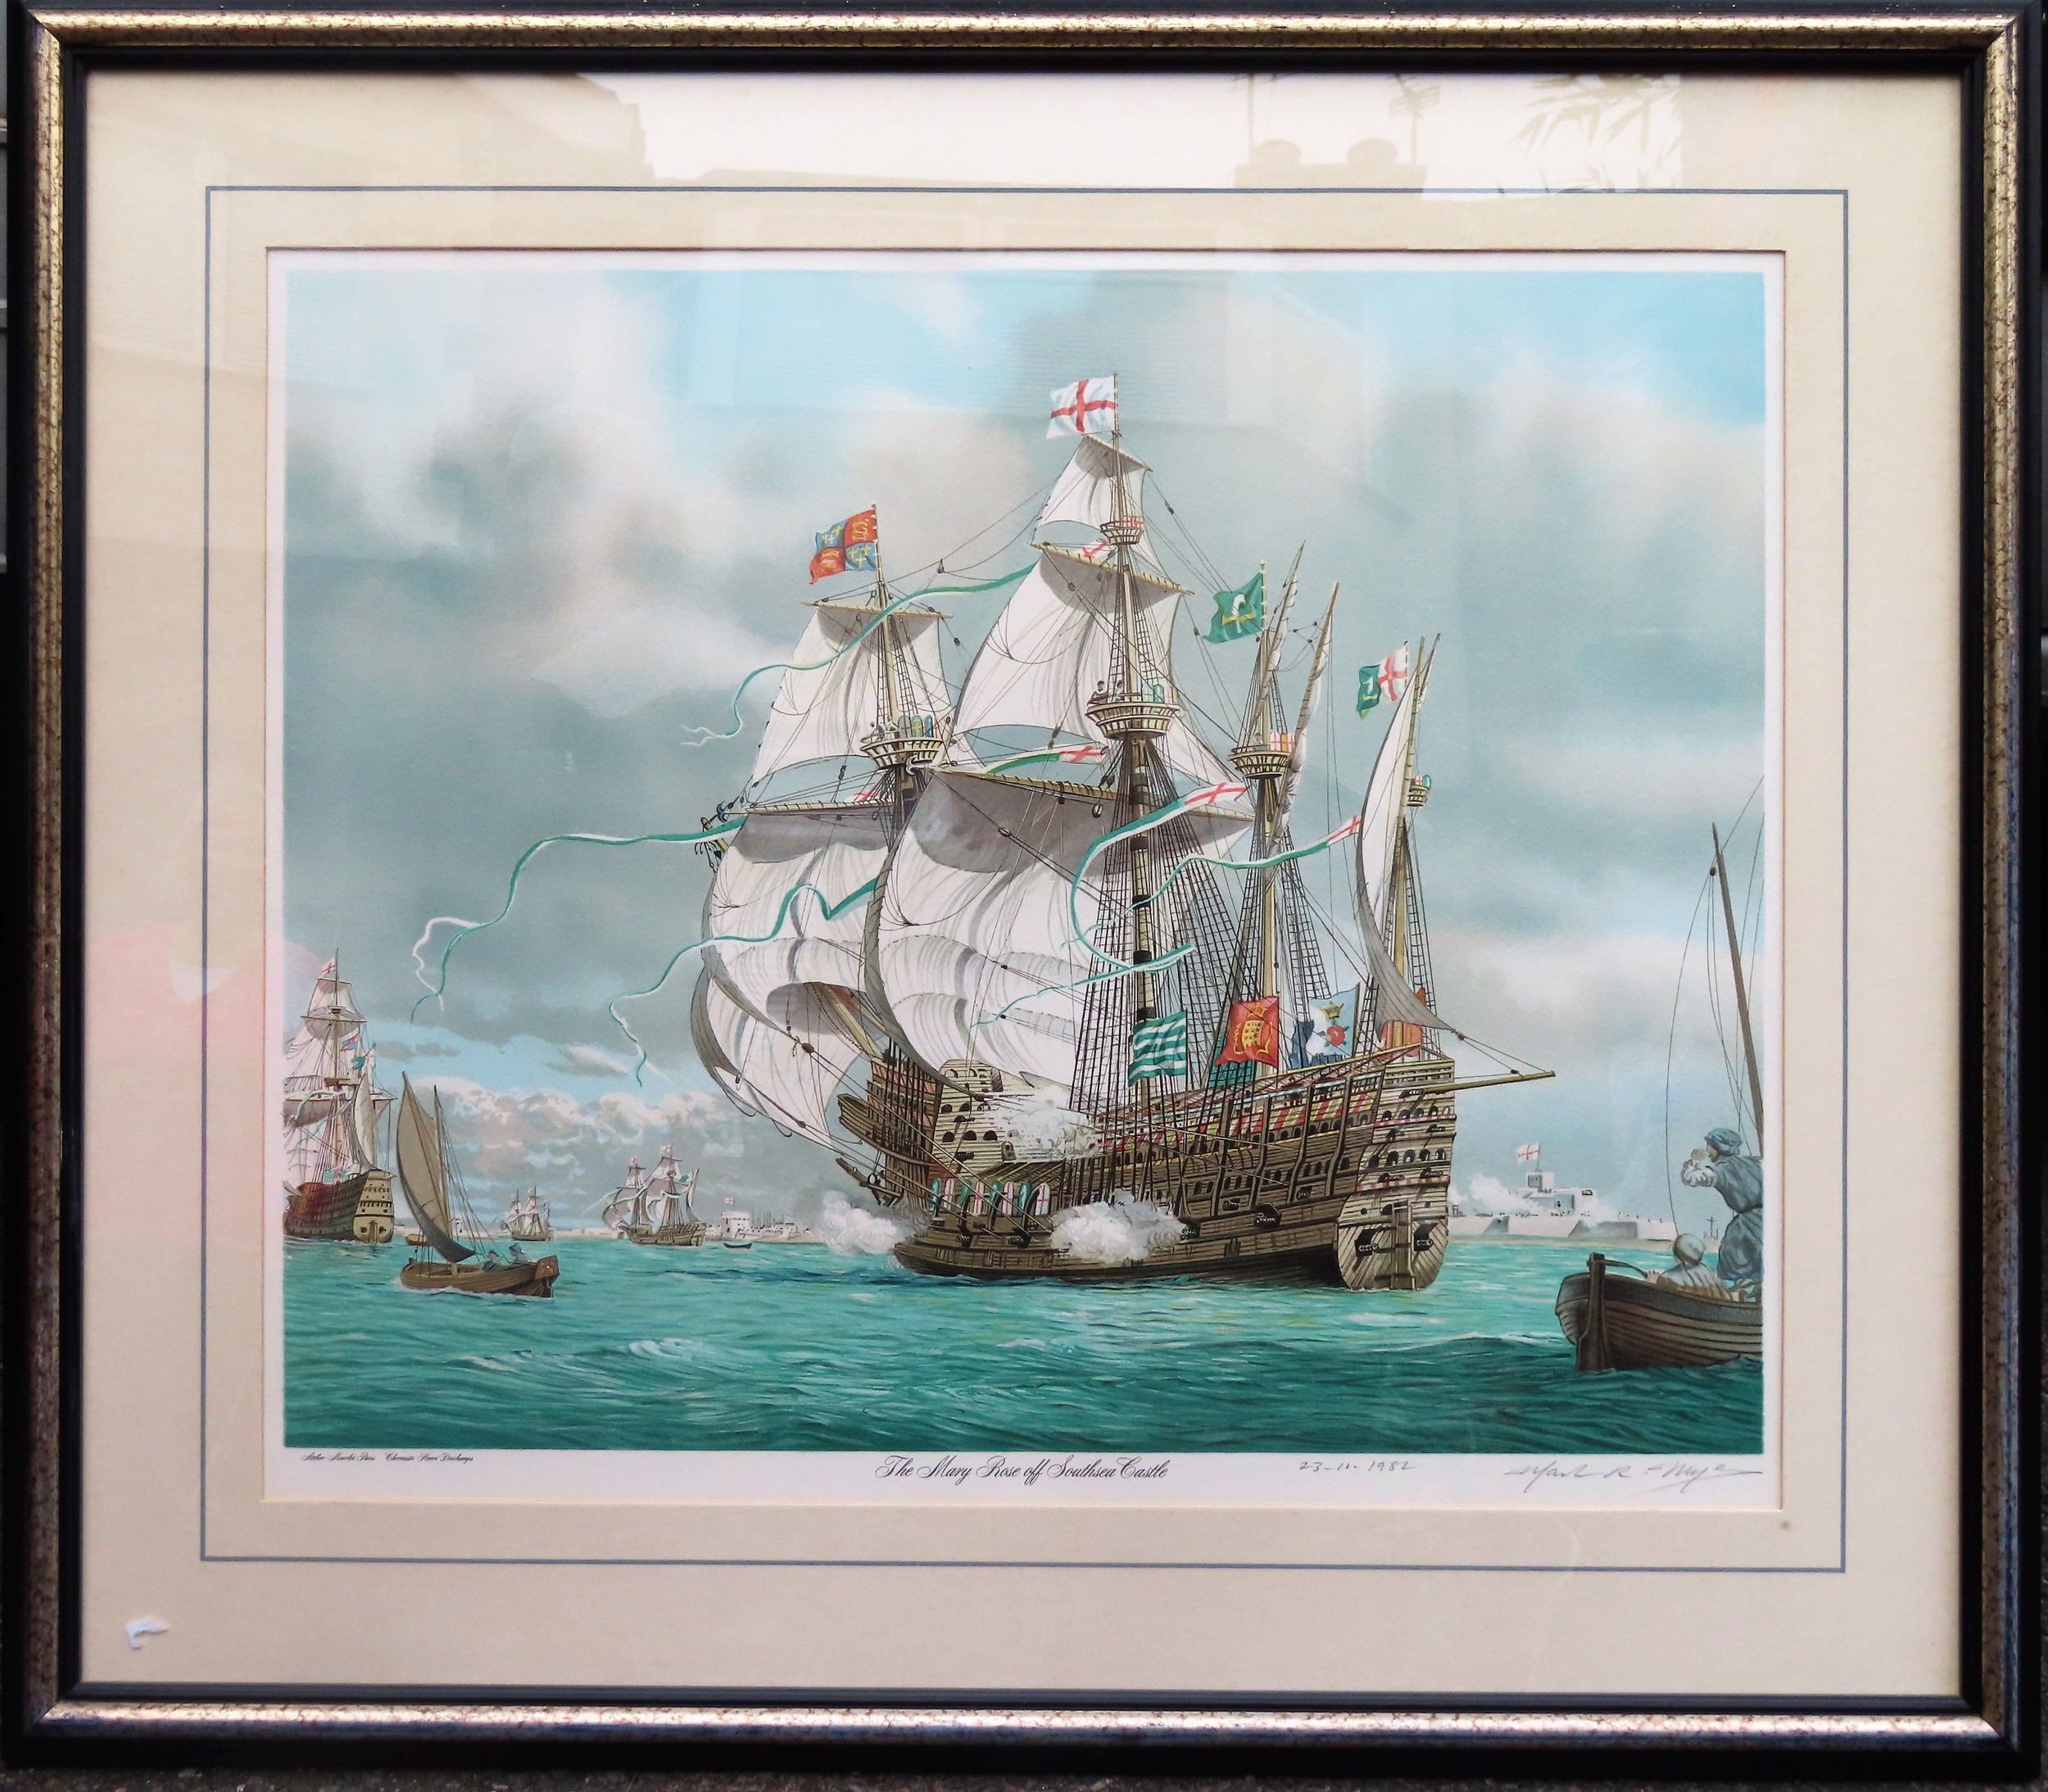 Framed pencil signed limited edition polychrome print "The Mary Rose" App. 43 x 52cm